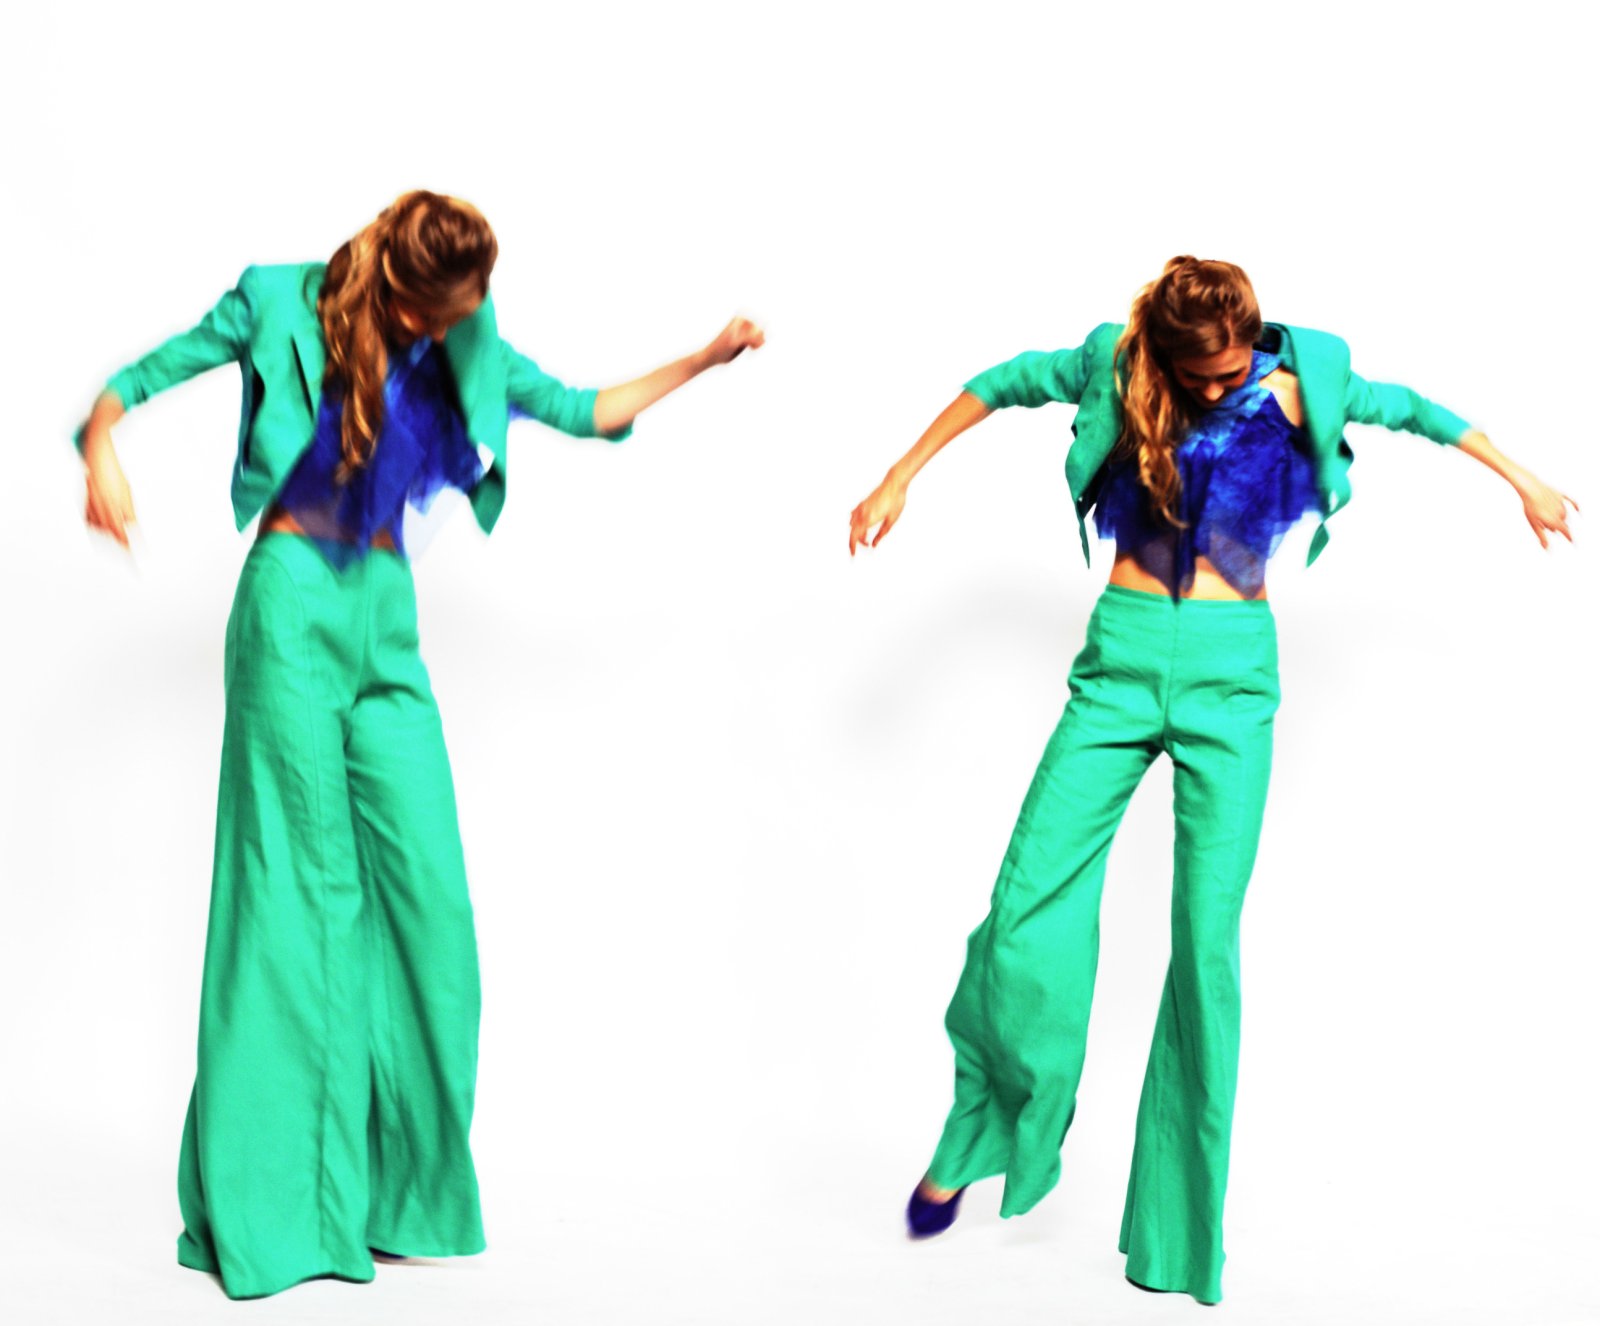 Jumping and spinning, Couture Studio Shoot, green pants suit from behind. Photography by Kent Johnson.